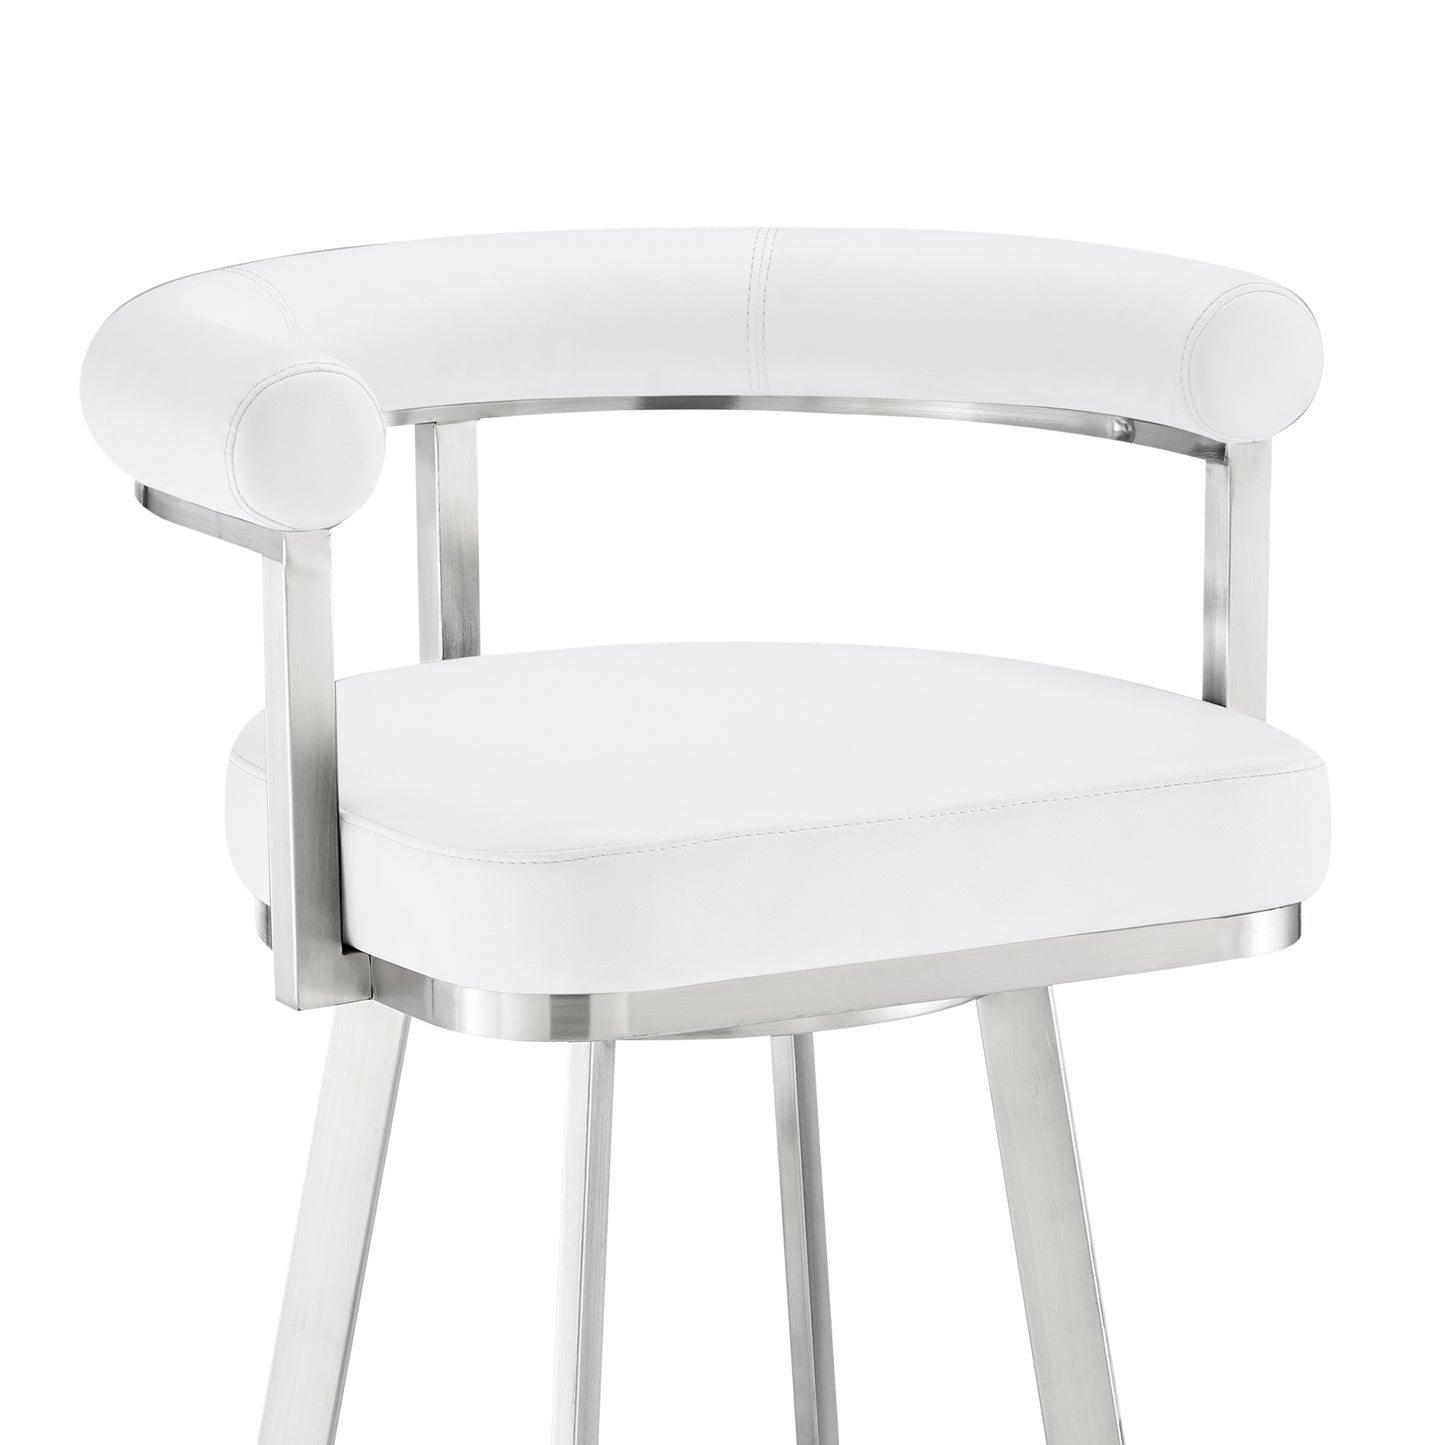 Magnolia 26" Swivel Counter Stool in Brushed Stainless Steel with White Faux Leather